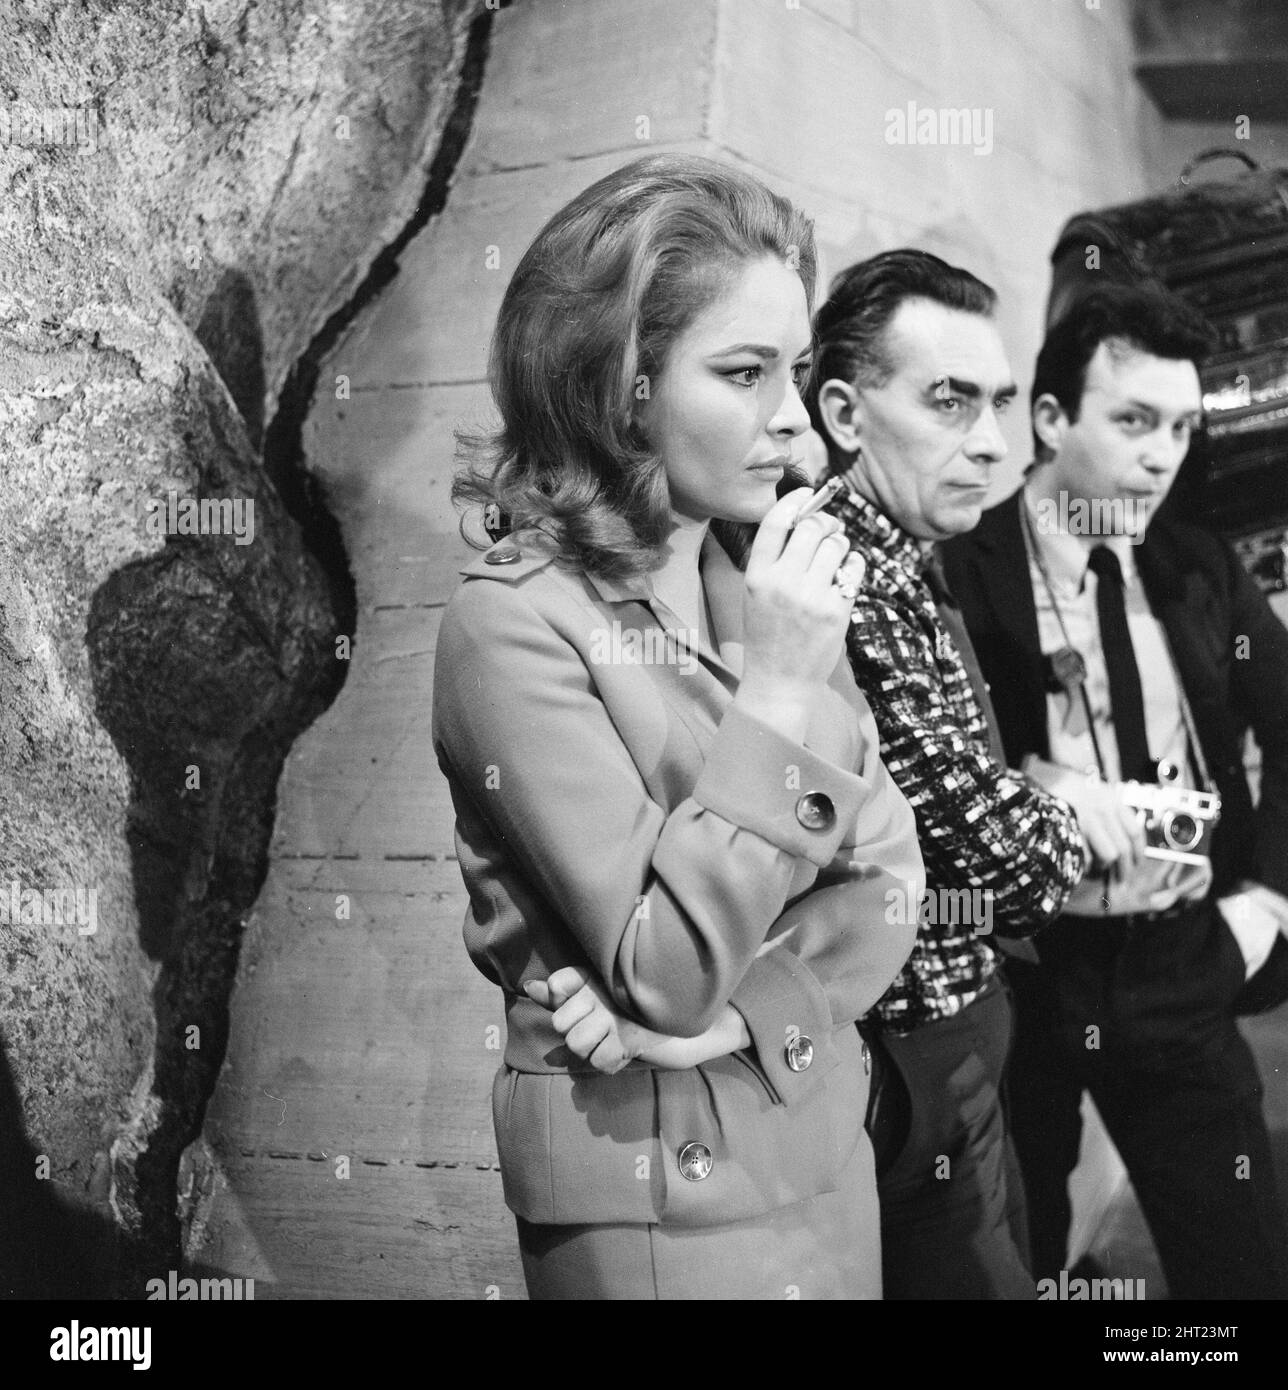 Karin Dor, German actress, on the set of new James Bond film, You Only Live Twice, she plays Spectre agent Helga Brandt, pictured at Pinewood Studios, Tuesday 6th December 1966. Our picture shows ... Karin watches as stunt girl Jenny Le Fre, completes her death scene, a fall as she walks across a narrow footbridge. Stock Photo